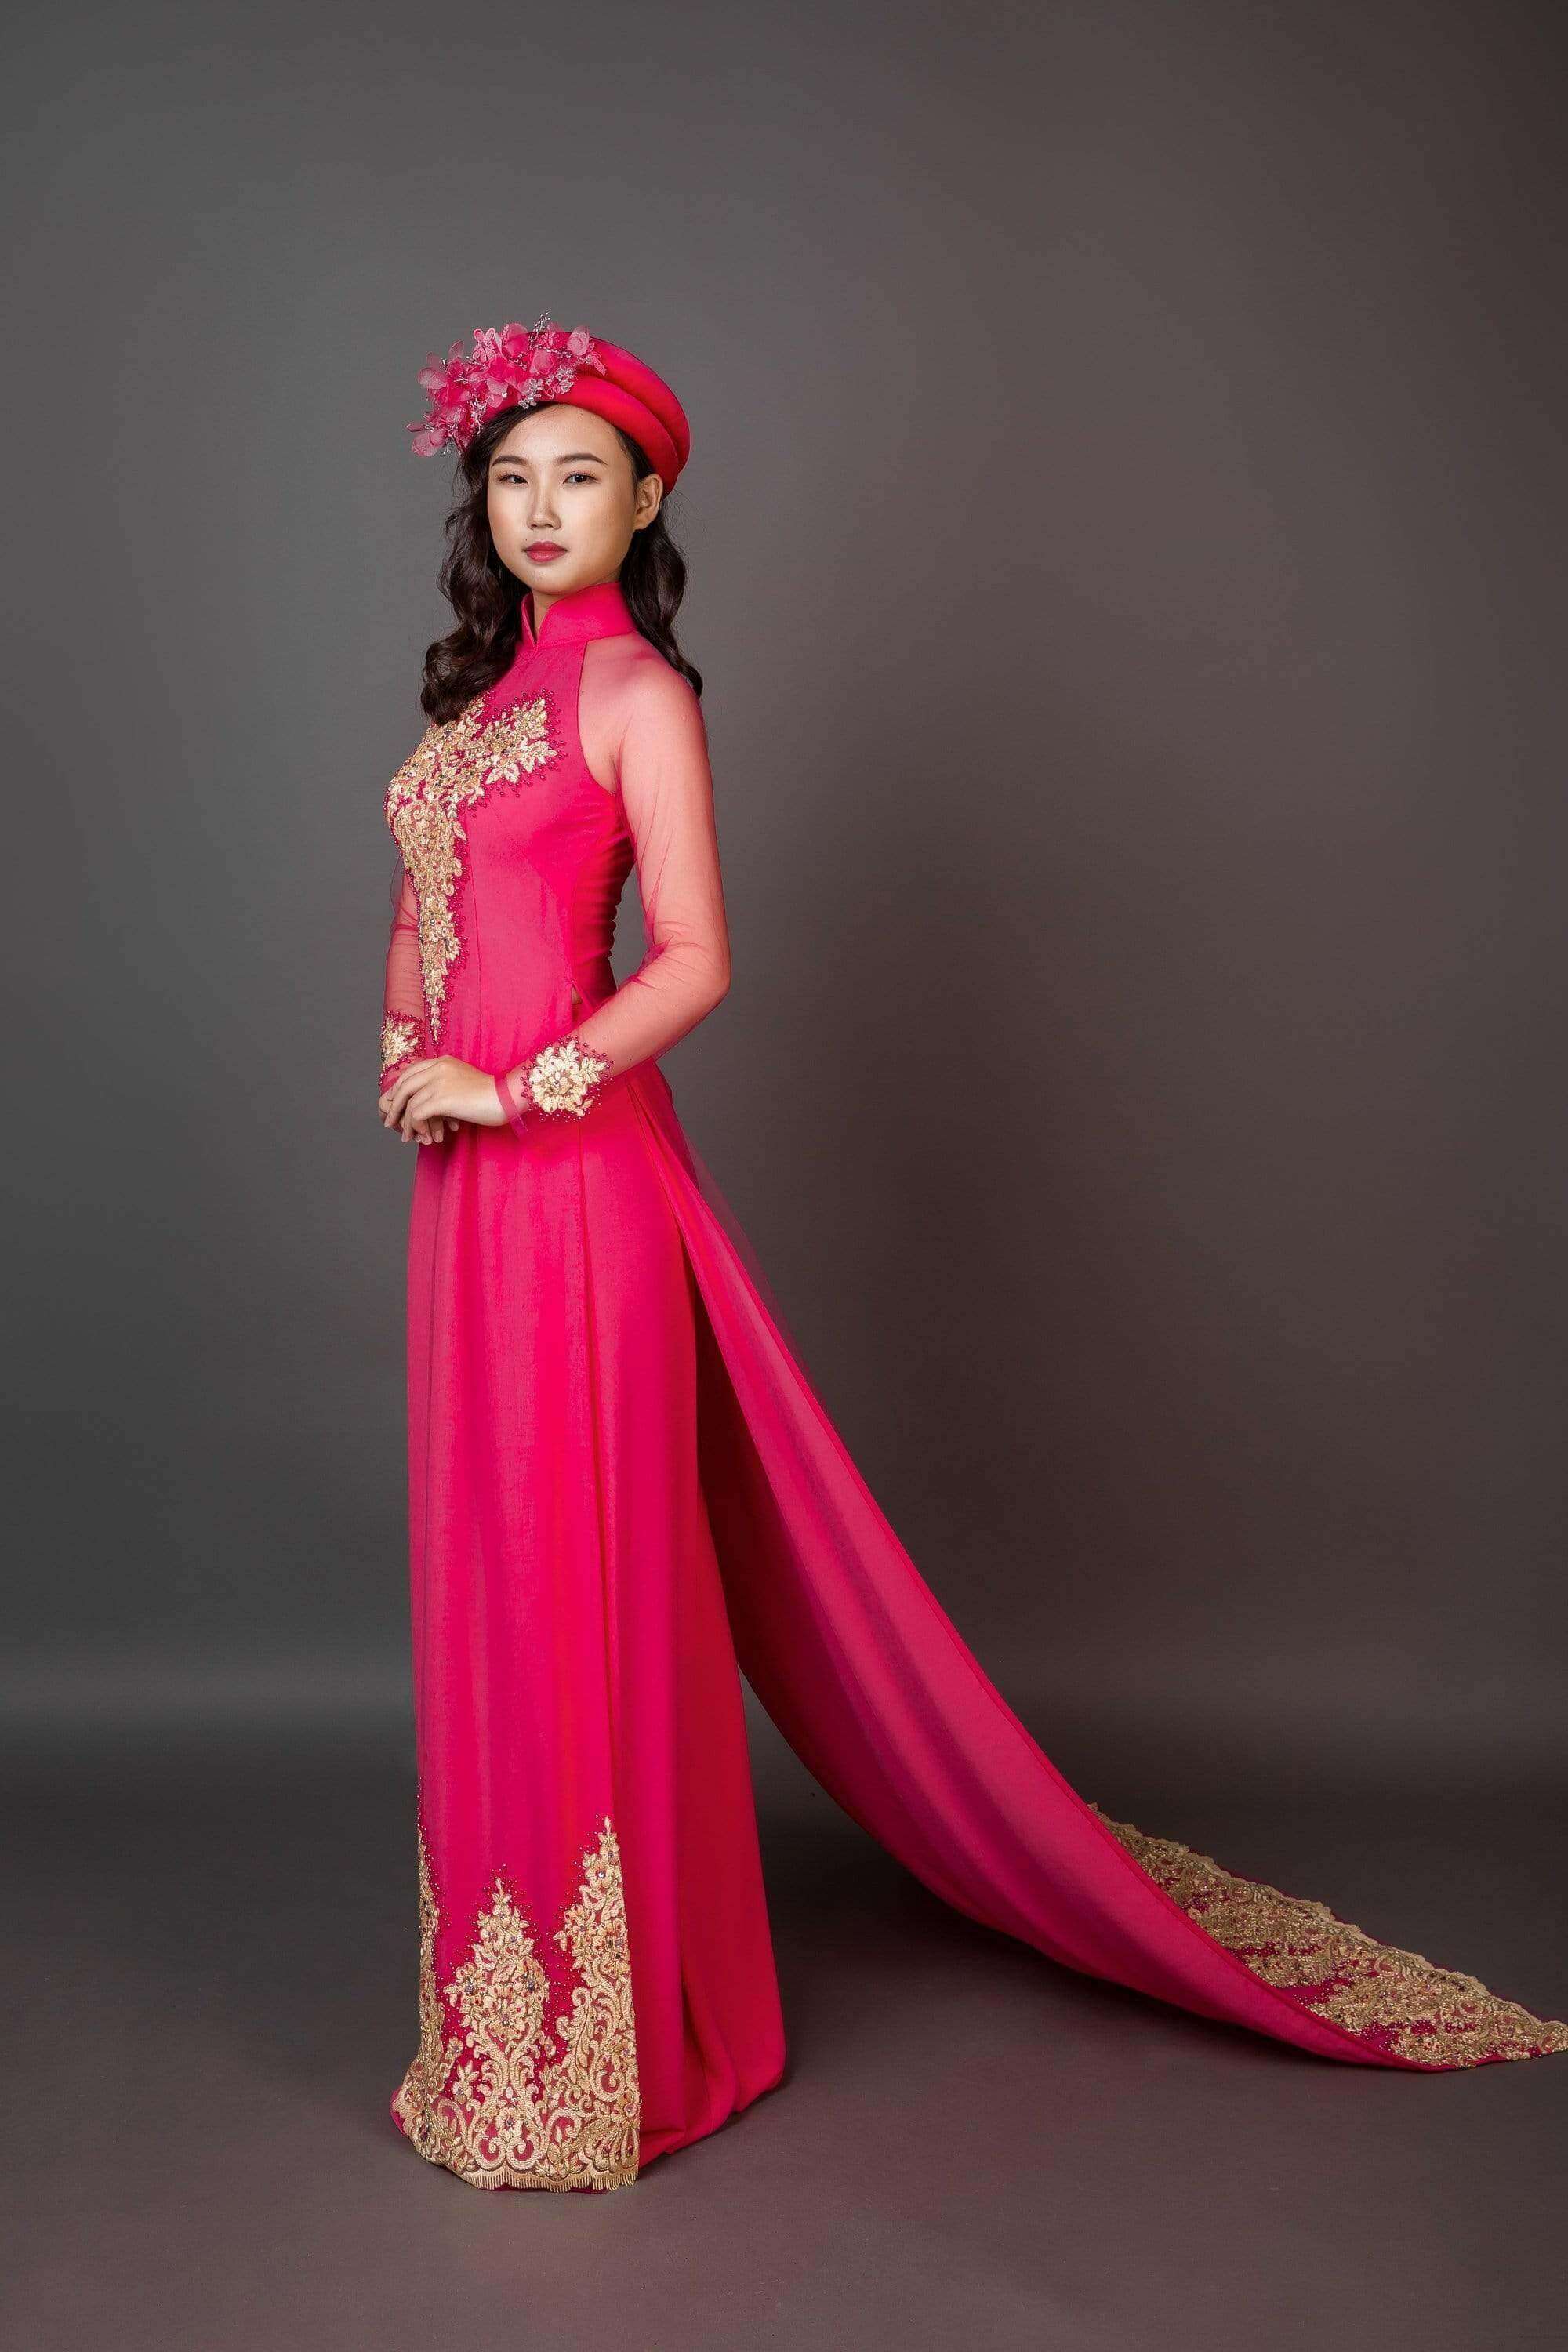 Mark&Vy Ao Dai Wedding ao dai with long train. Pink fabric with gold colored details.